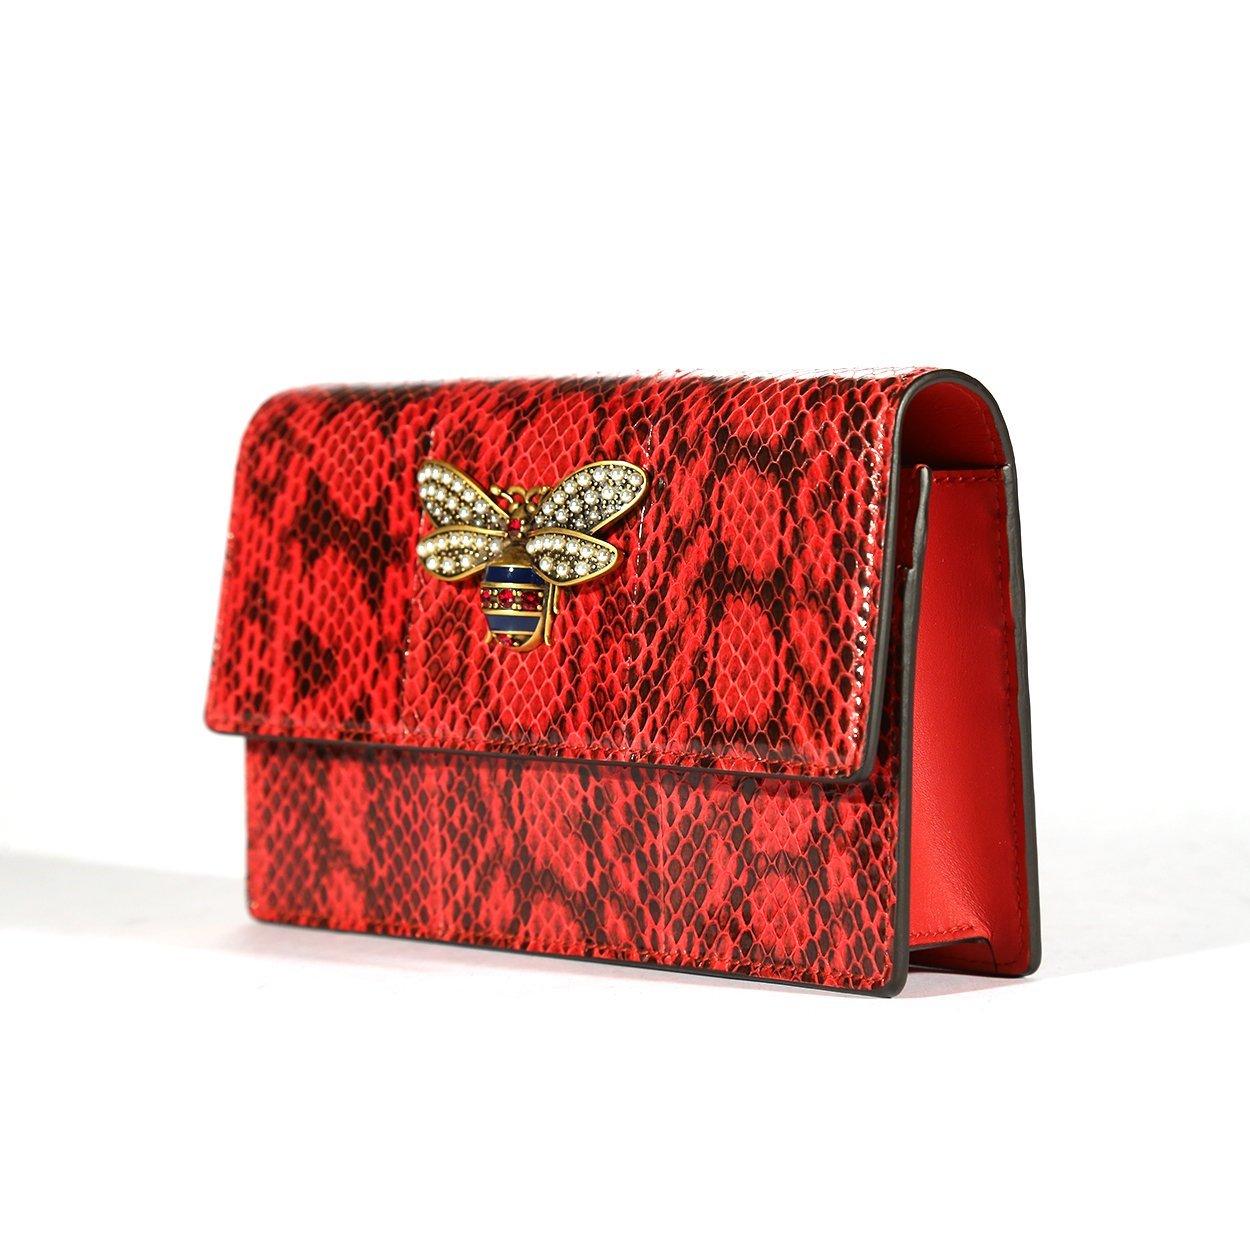 Gucci Bee gorgeous crossbody red striped bag c.2020 - Katheley's